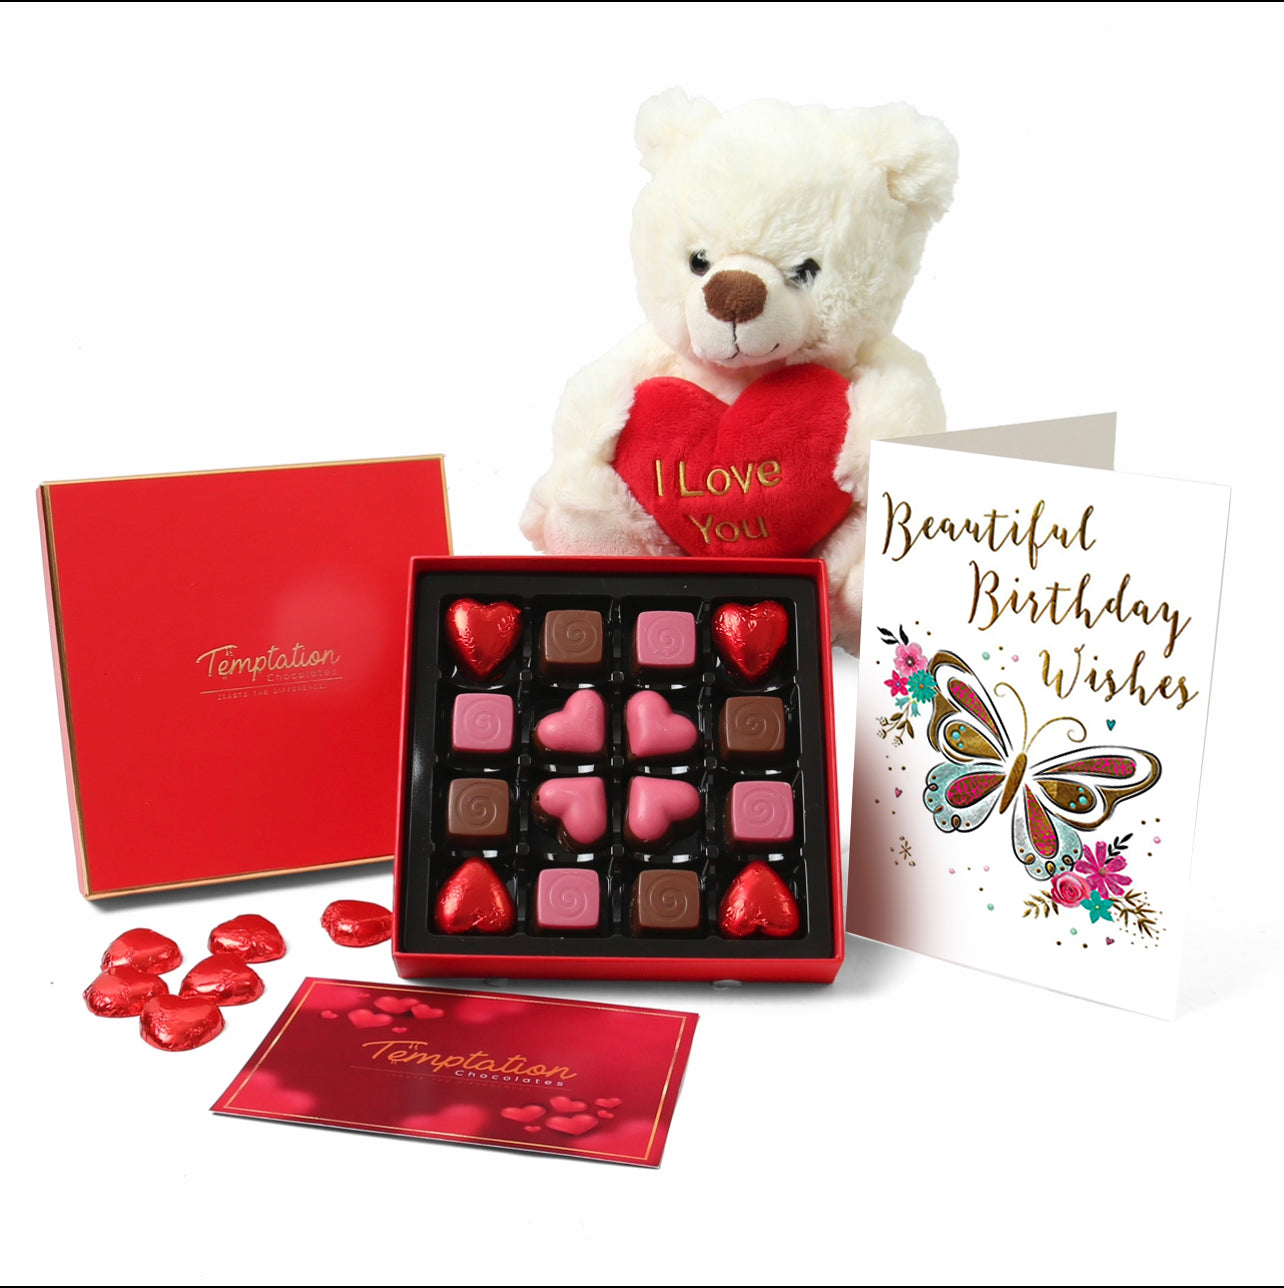 One Cocoa London 16-Piece Chocolate Gift Set with Scented Rose Petals, Handmade Card, and 'I LOVE YOU' Teddy Perfect For Any Occasion